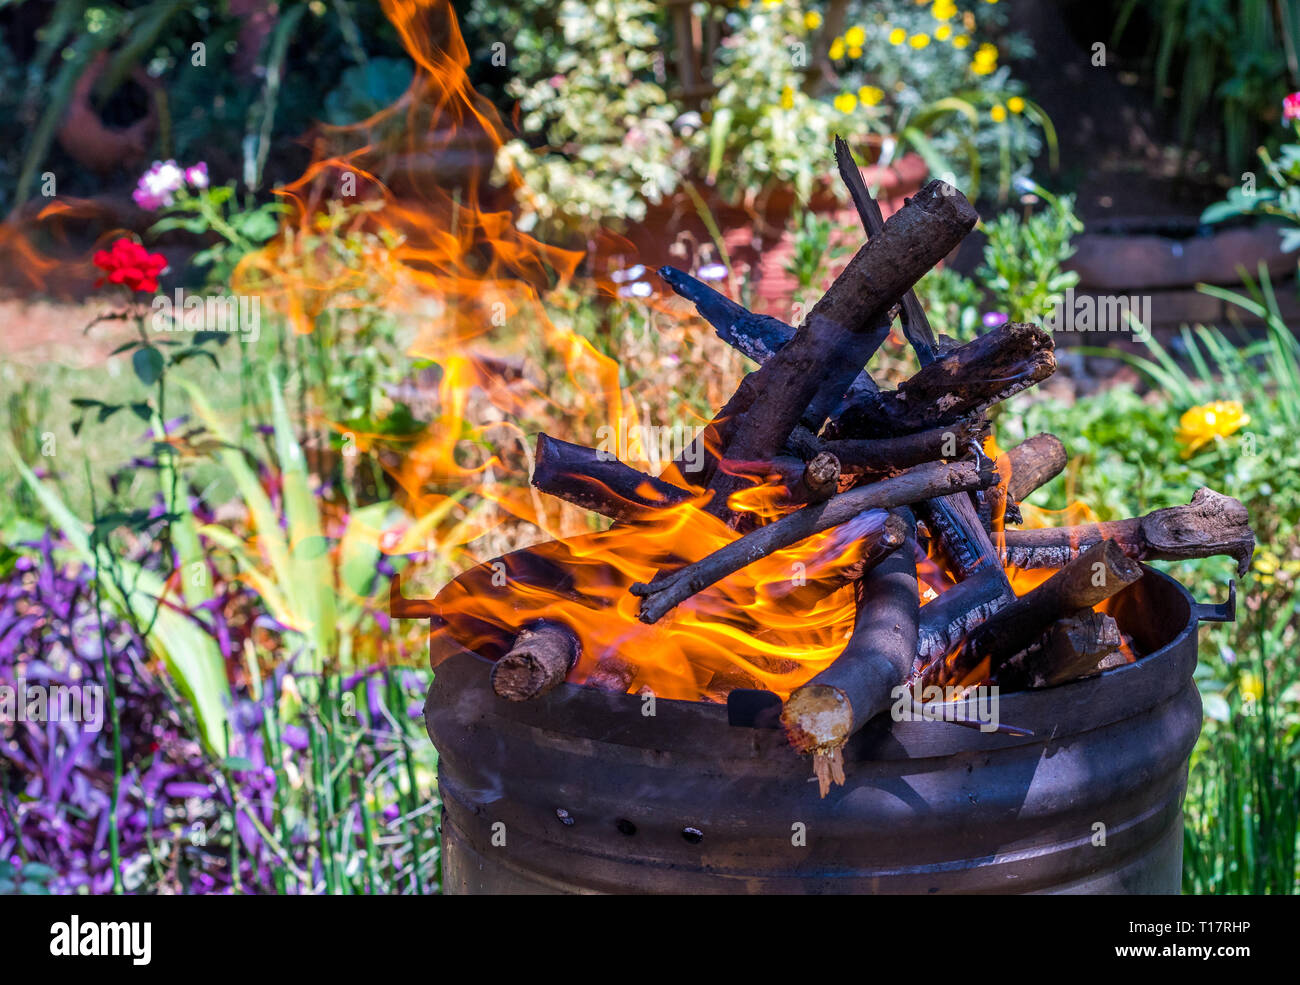 A barbeque fire lit in a steel barrel outside on a summers day image with copy space in landscape format Stock Photo